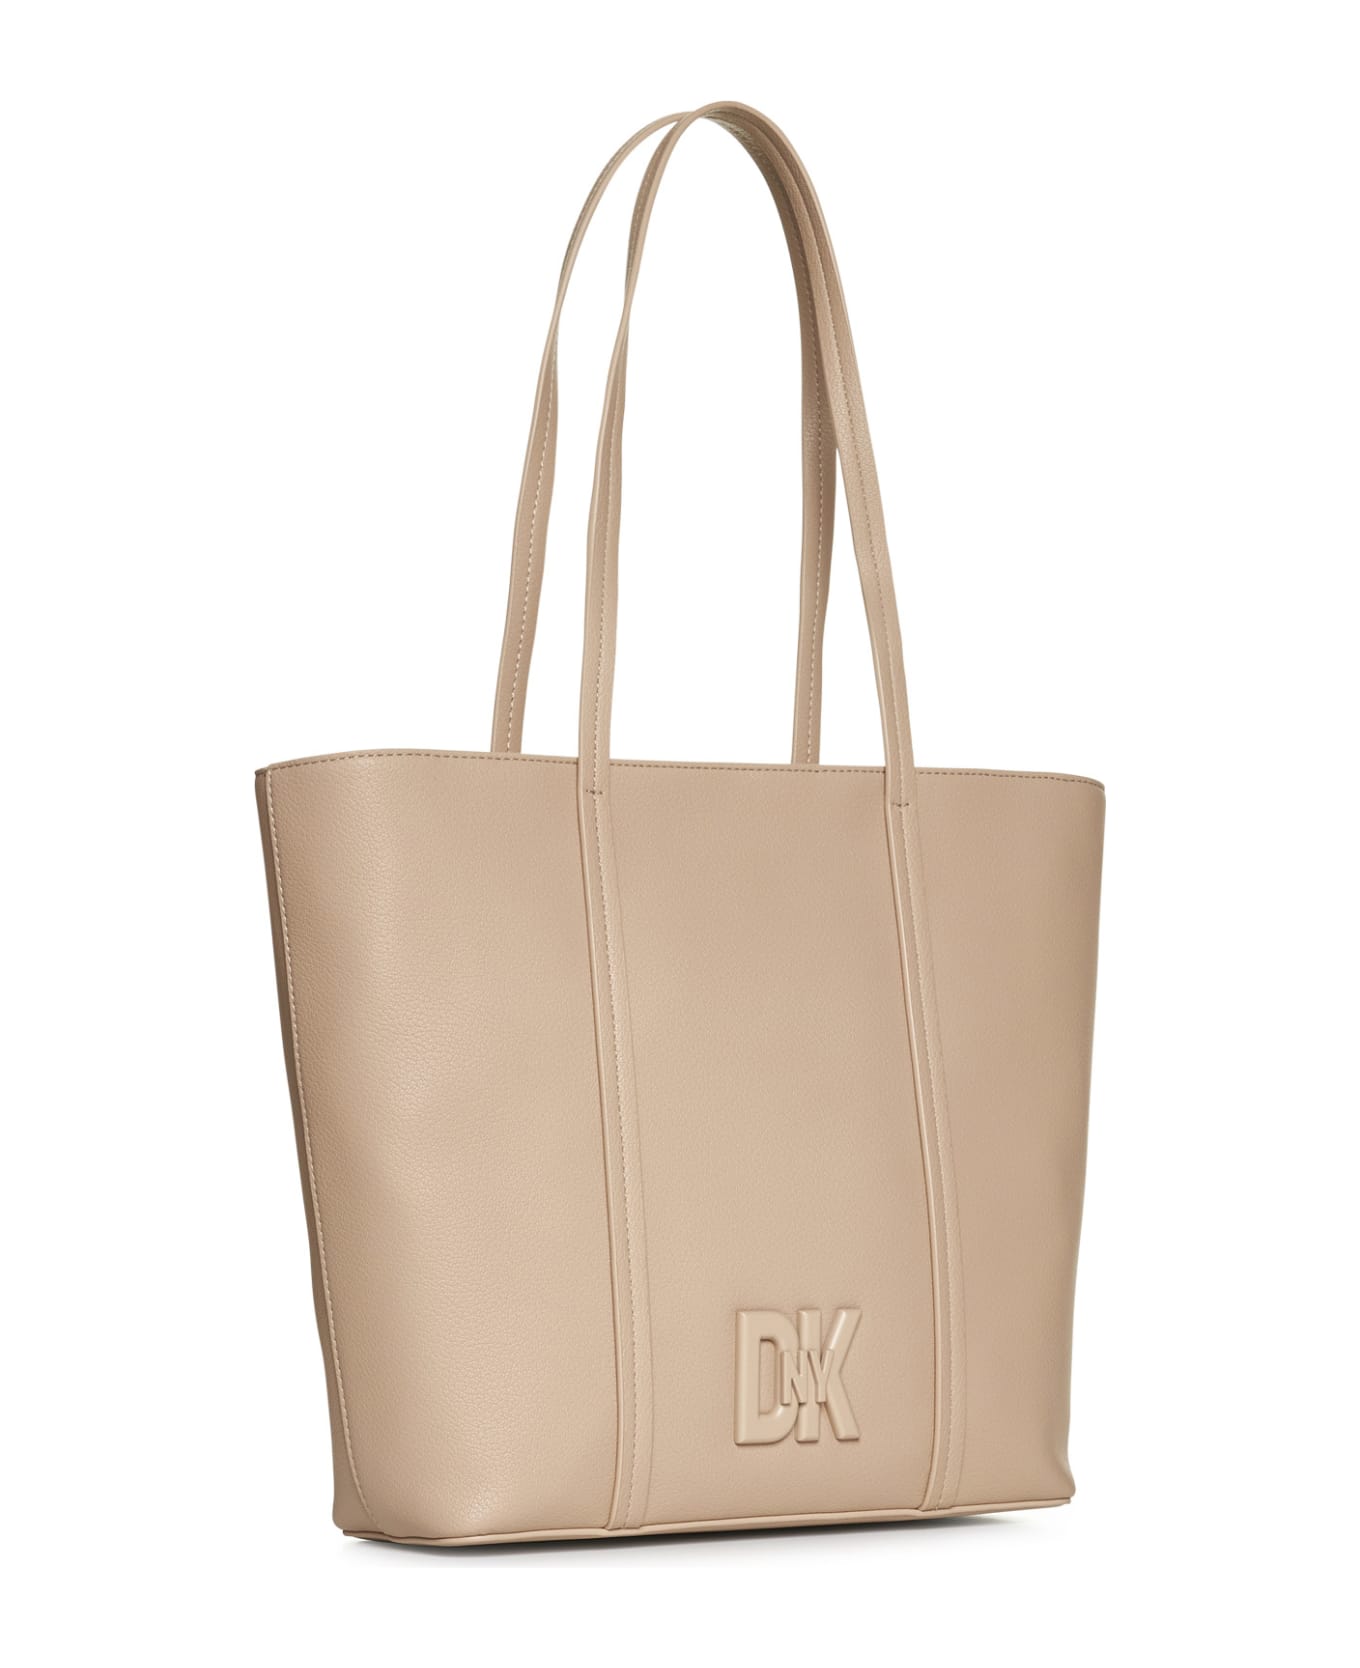 DKNY Tote - Neutral トートバッグ